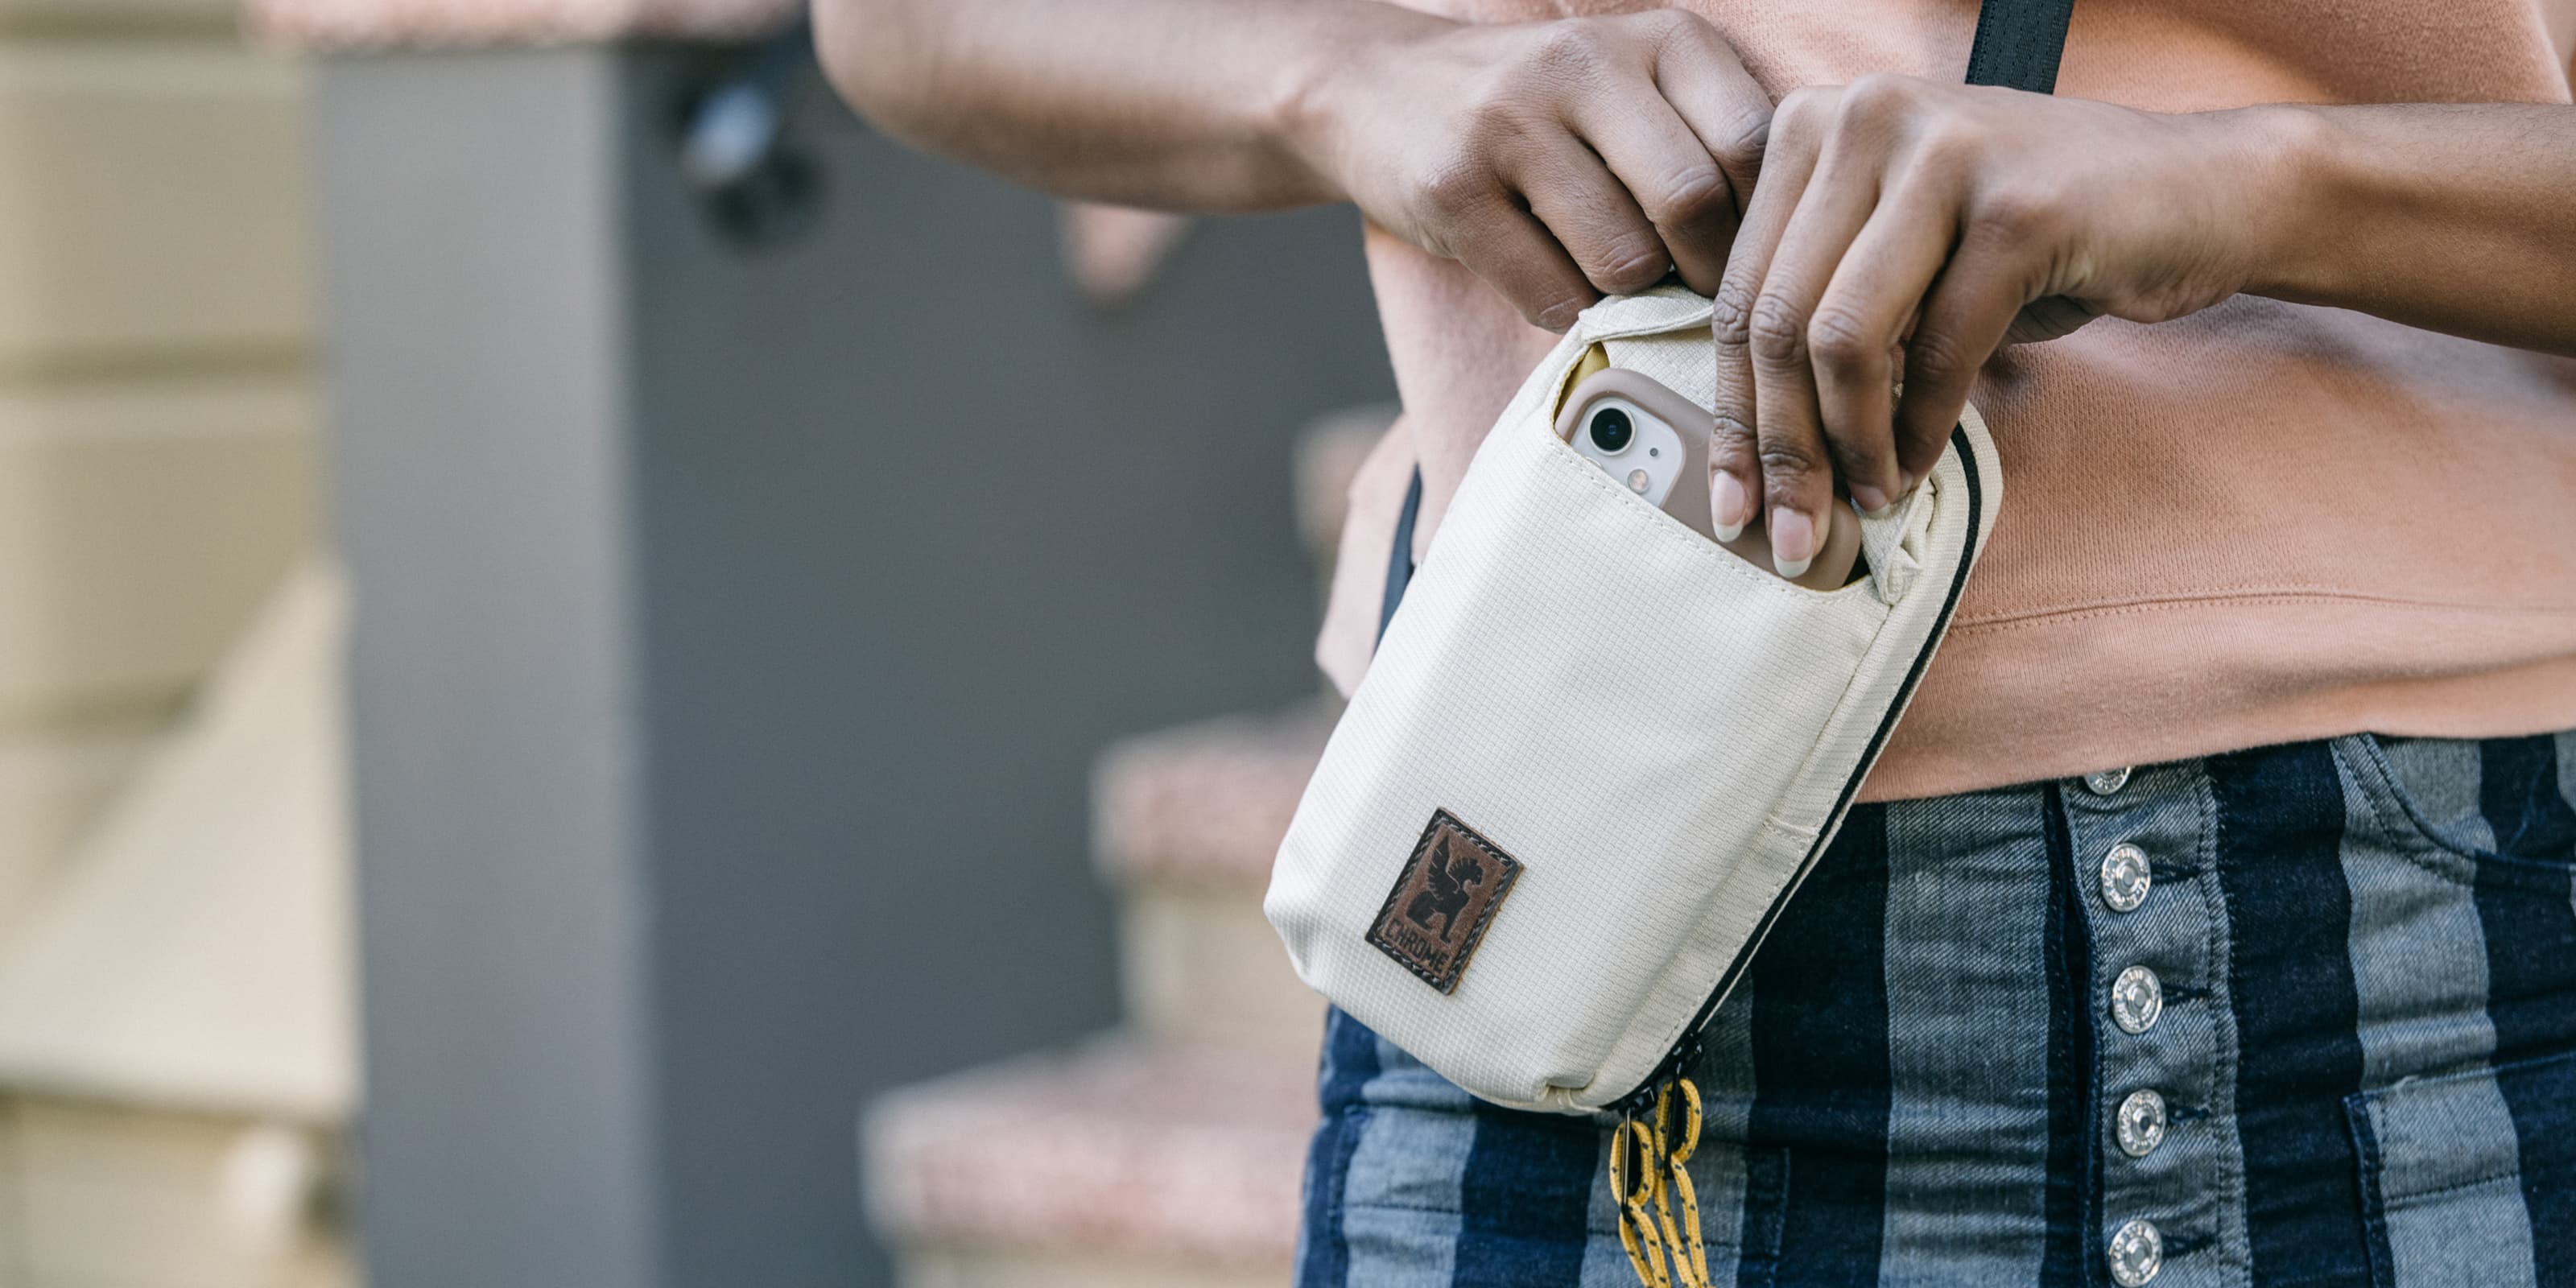 Ruckas Accessory Pouch shown as someone takes out their phone